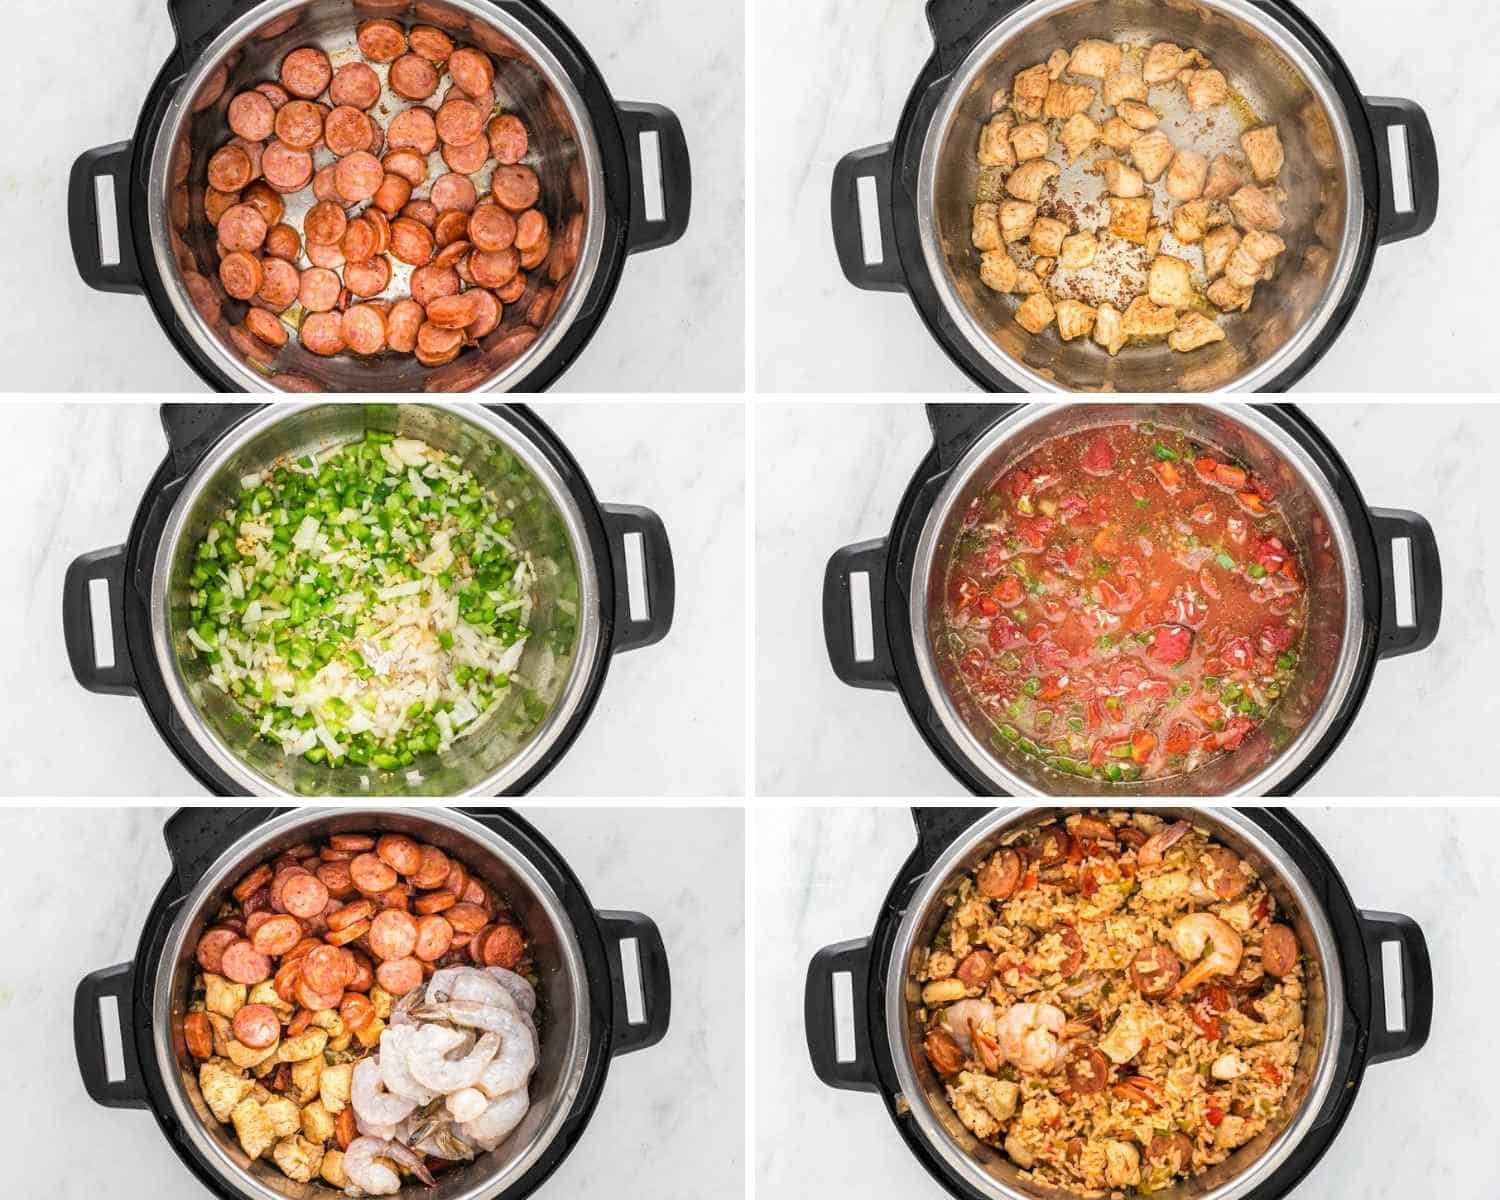 Collage of 6 images showing how to make jambalaya in the instant pot, step by step.